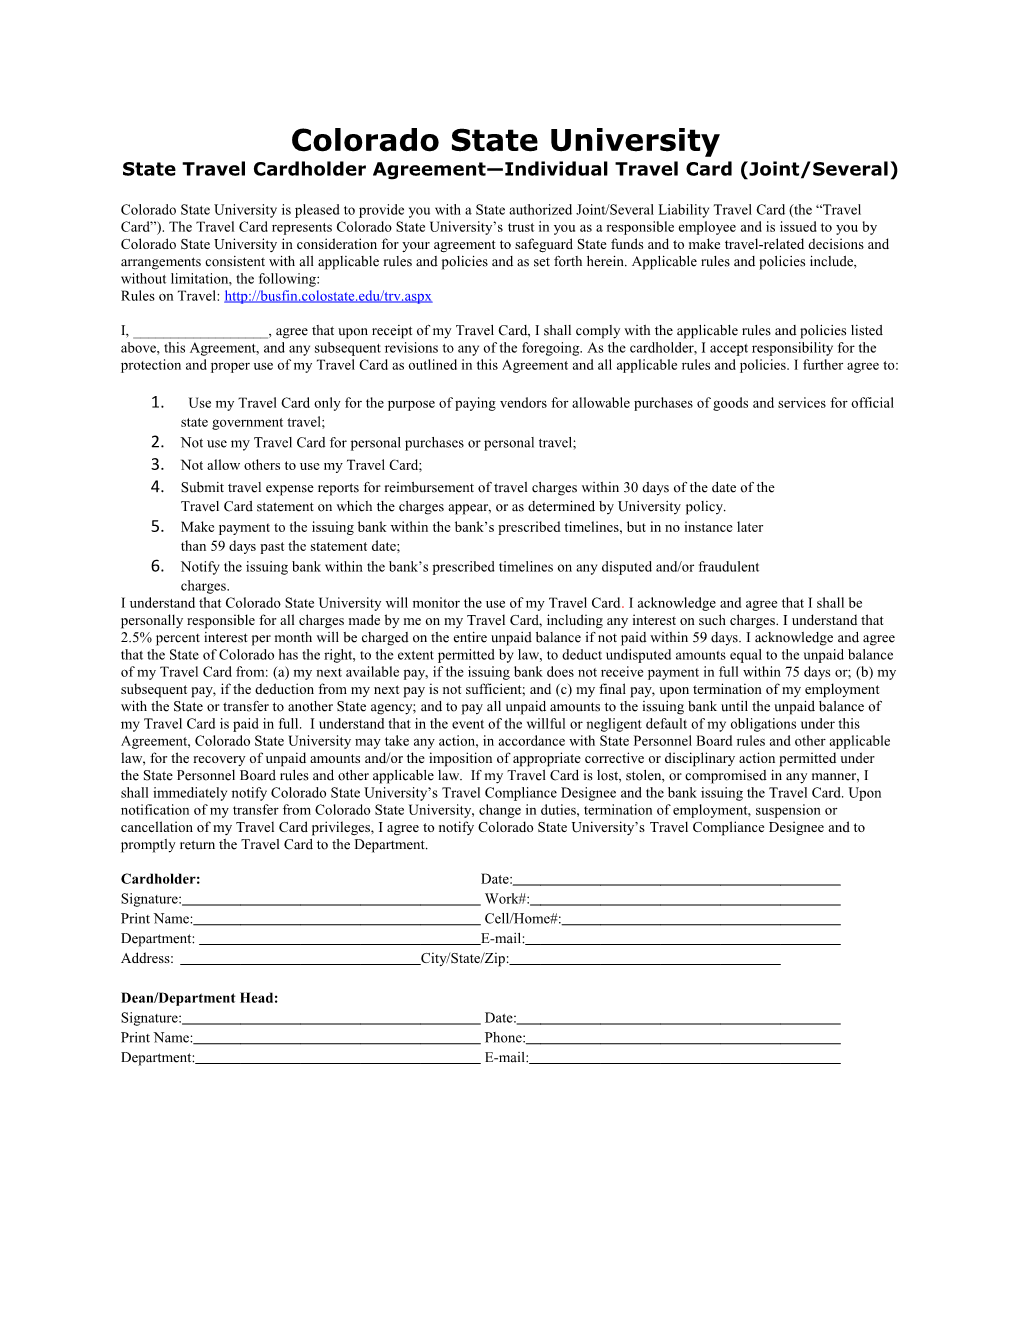 State Travel Cardholder Agreement Individual Travel Card (Joint/Several)